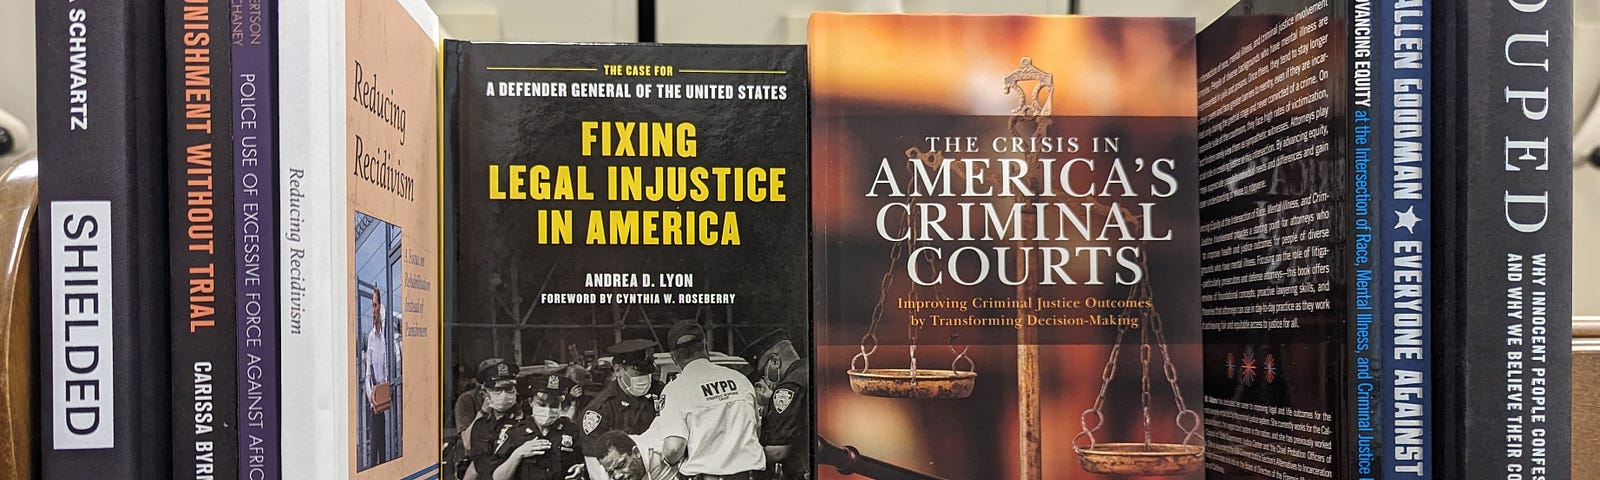 Nine books are displayed on a shelf. Four books on the left and three books on the right are standing with their spines out. The two books in the middle are displayed with their covers out. The titles on these two books are “Fixing Legal Injustice in America” and “The Crisis in America’s Criminal Courts.”